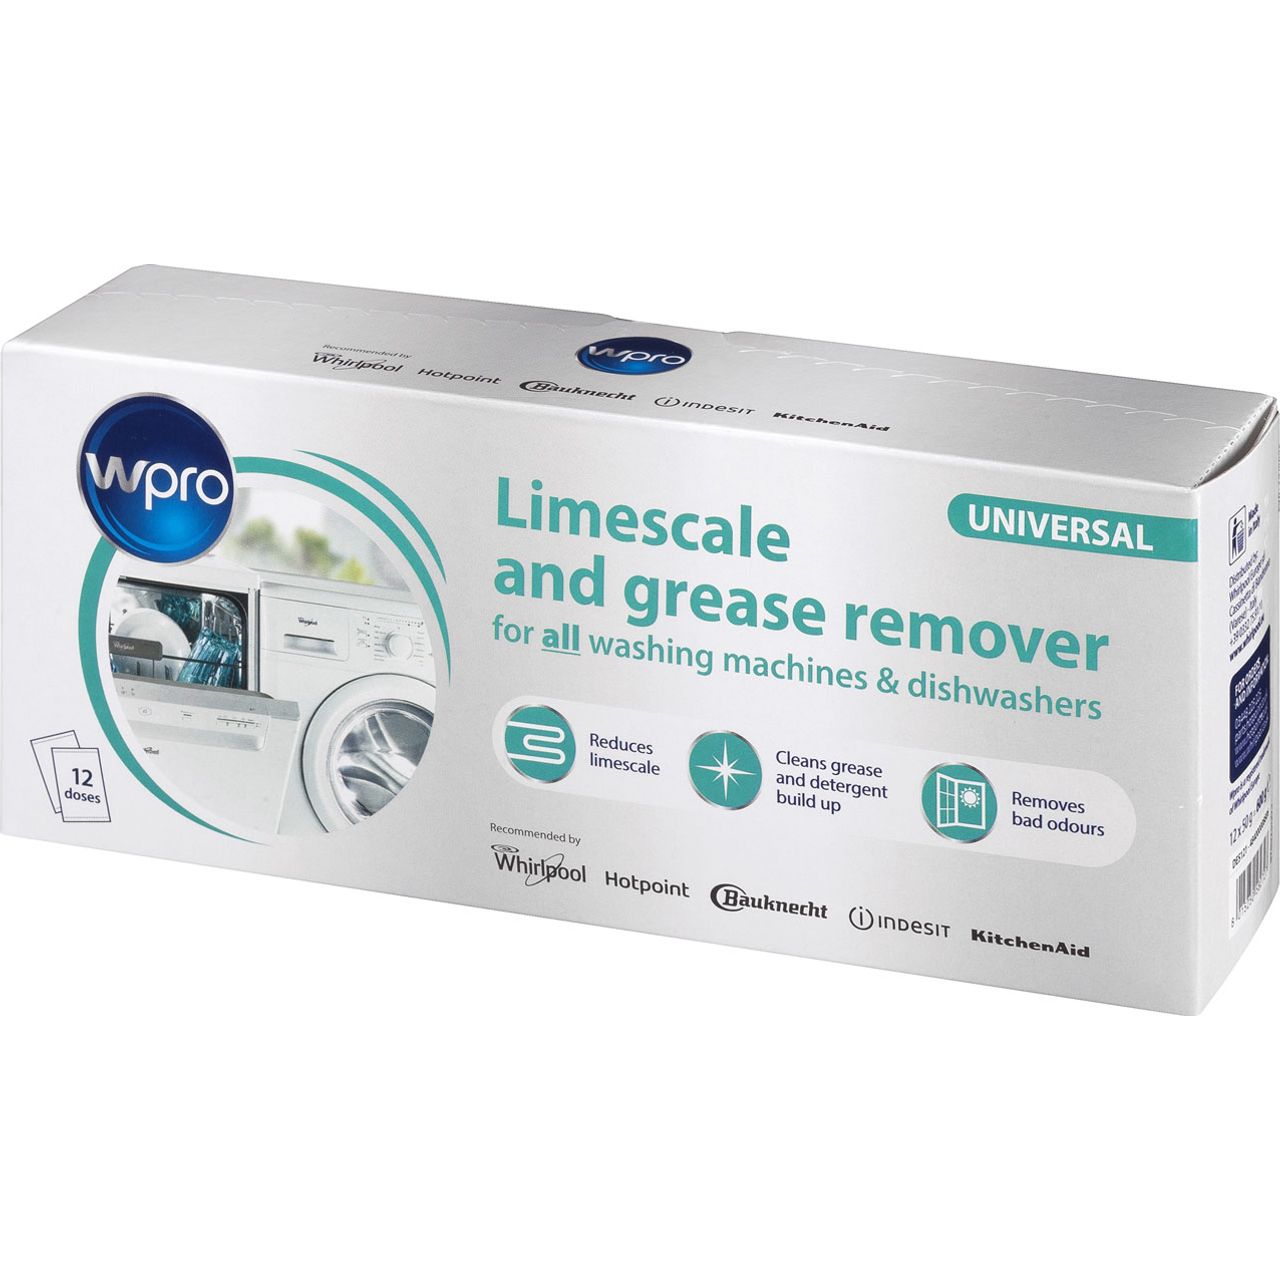 Wpro Limescale & Grease Remover Review